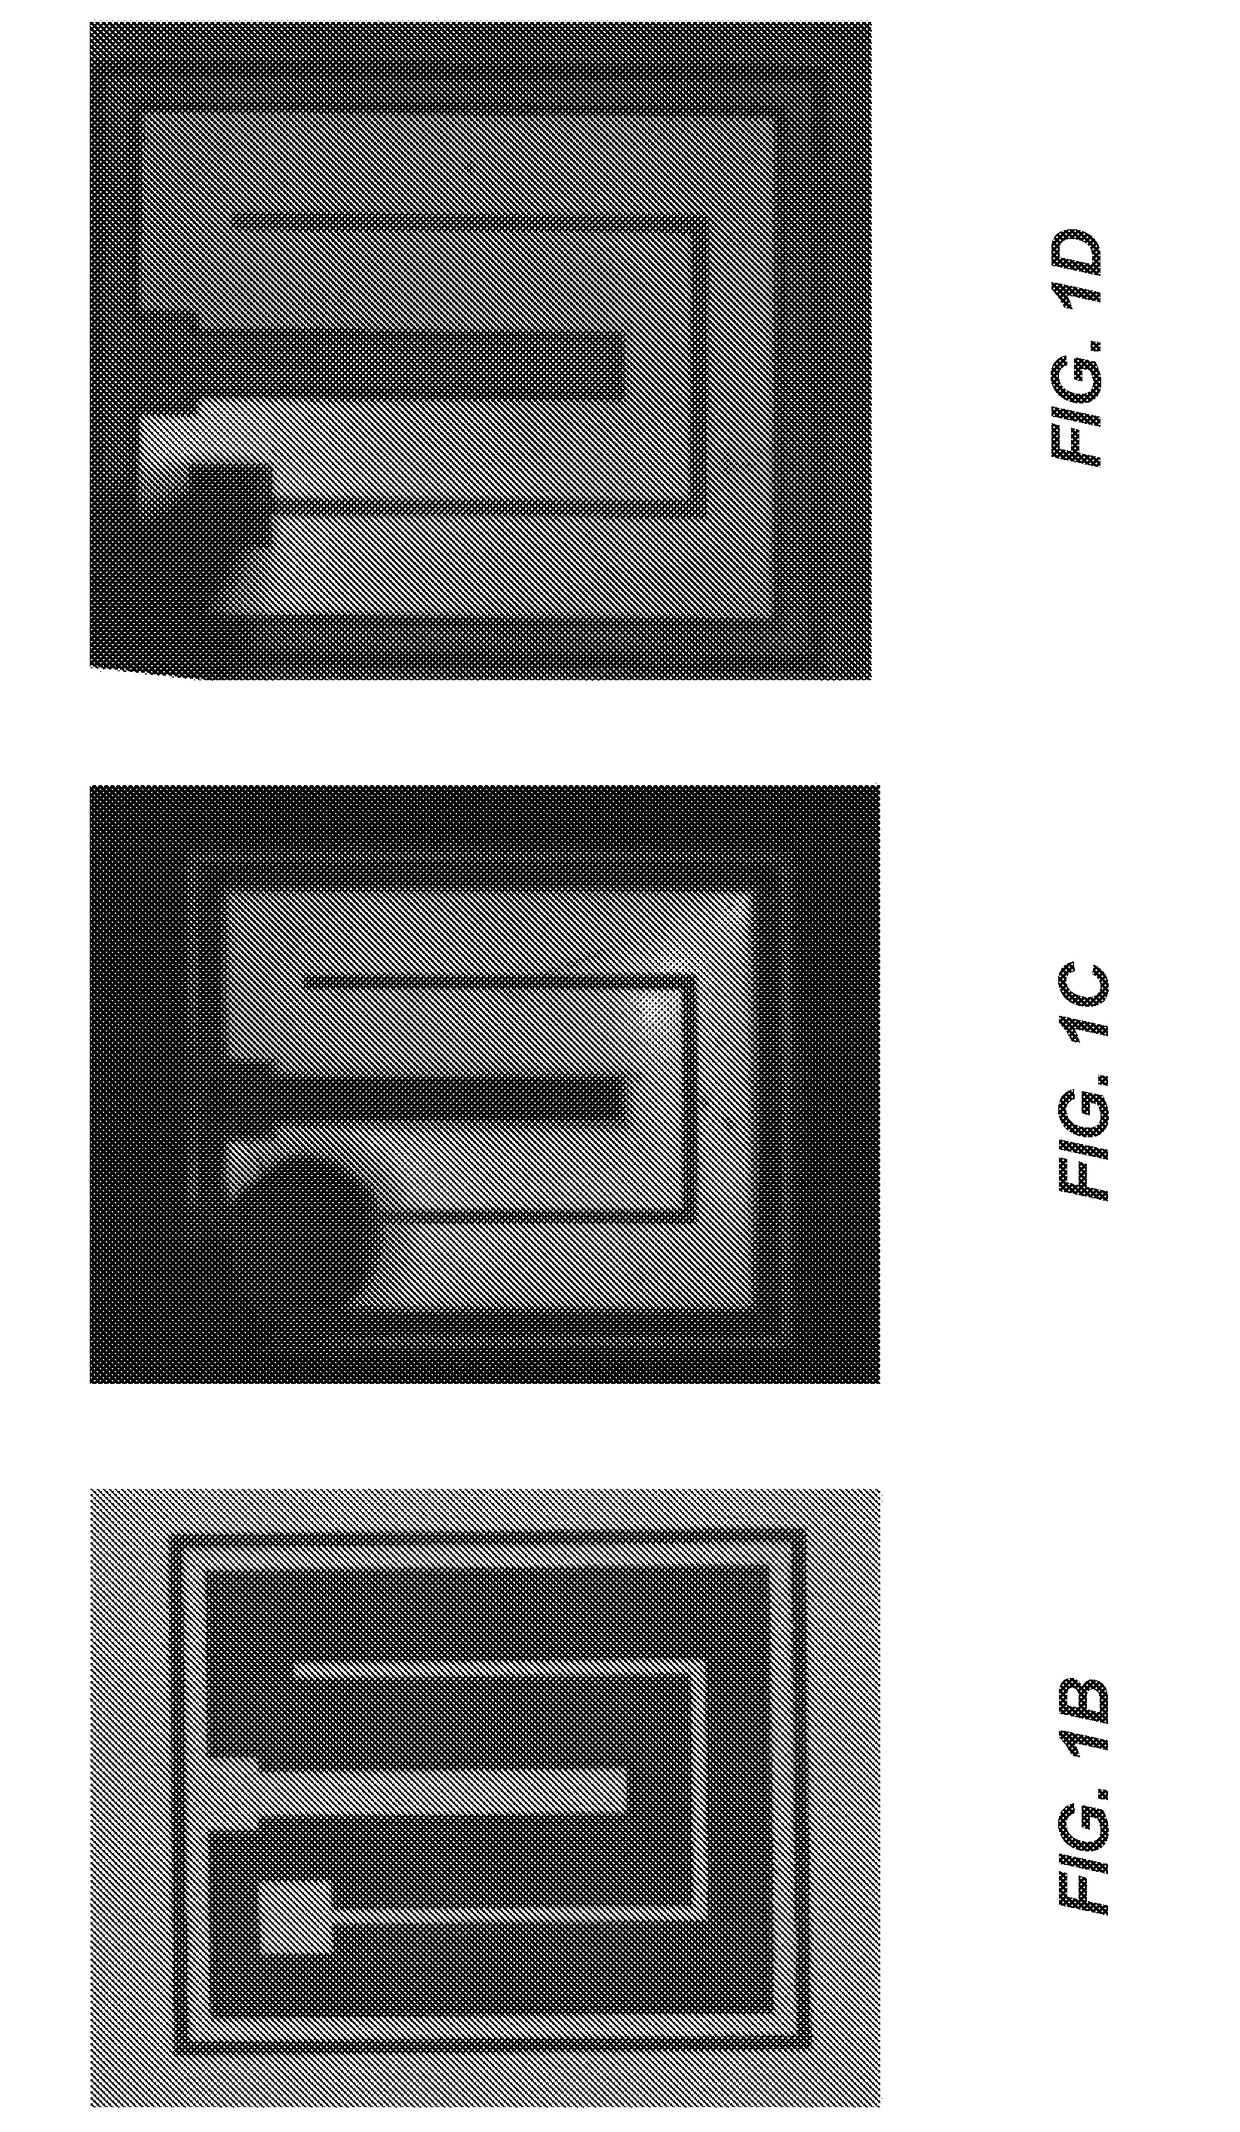 Hybrid growth method for iii-nitride tunnel junction devices